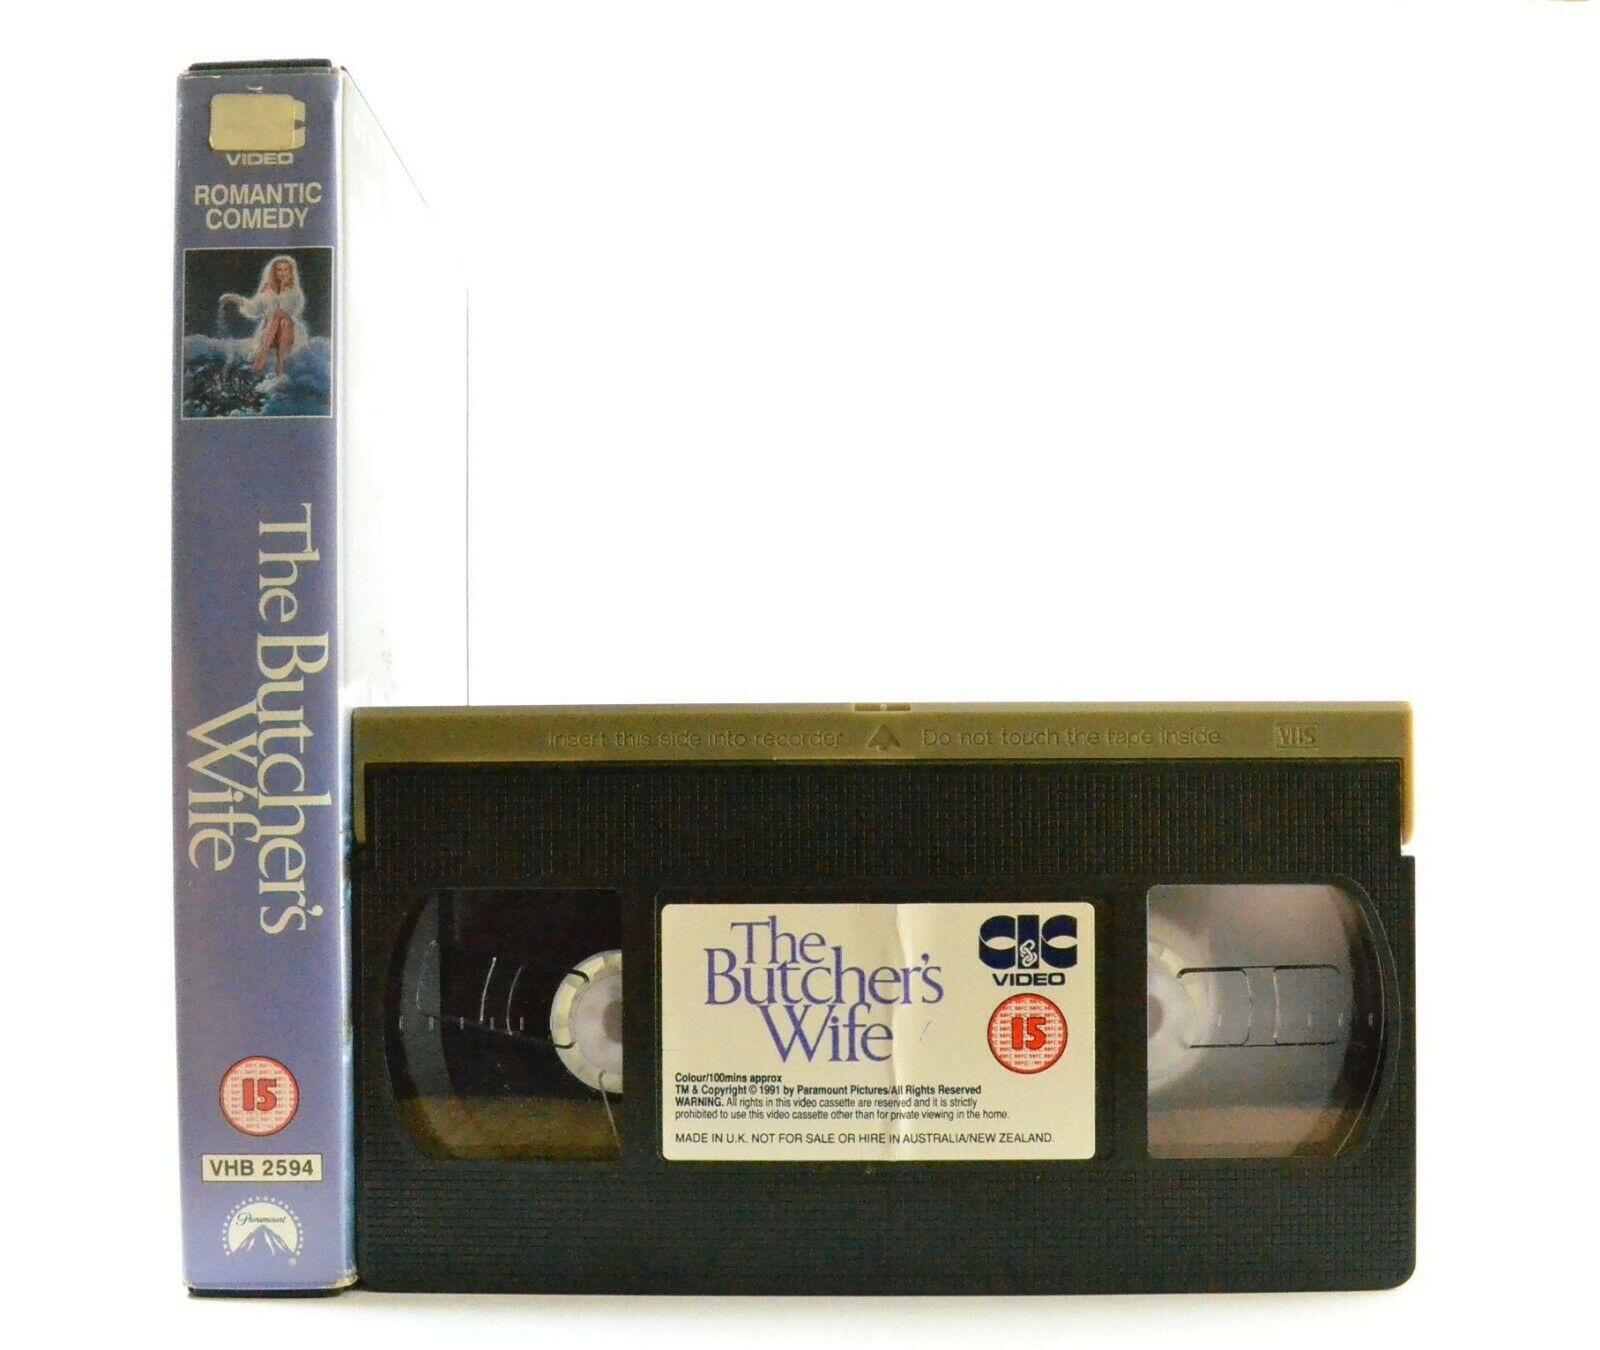 The Butcher's Wife: CIC Video (1991) - Large Box - Romantic Comedy - Pal VHS-